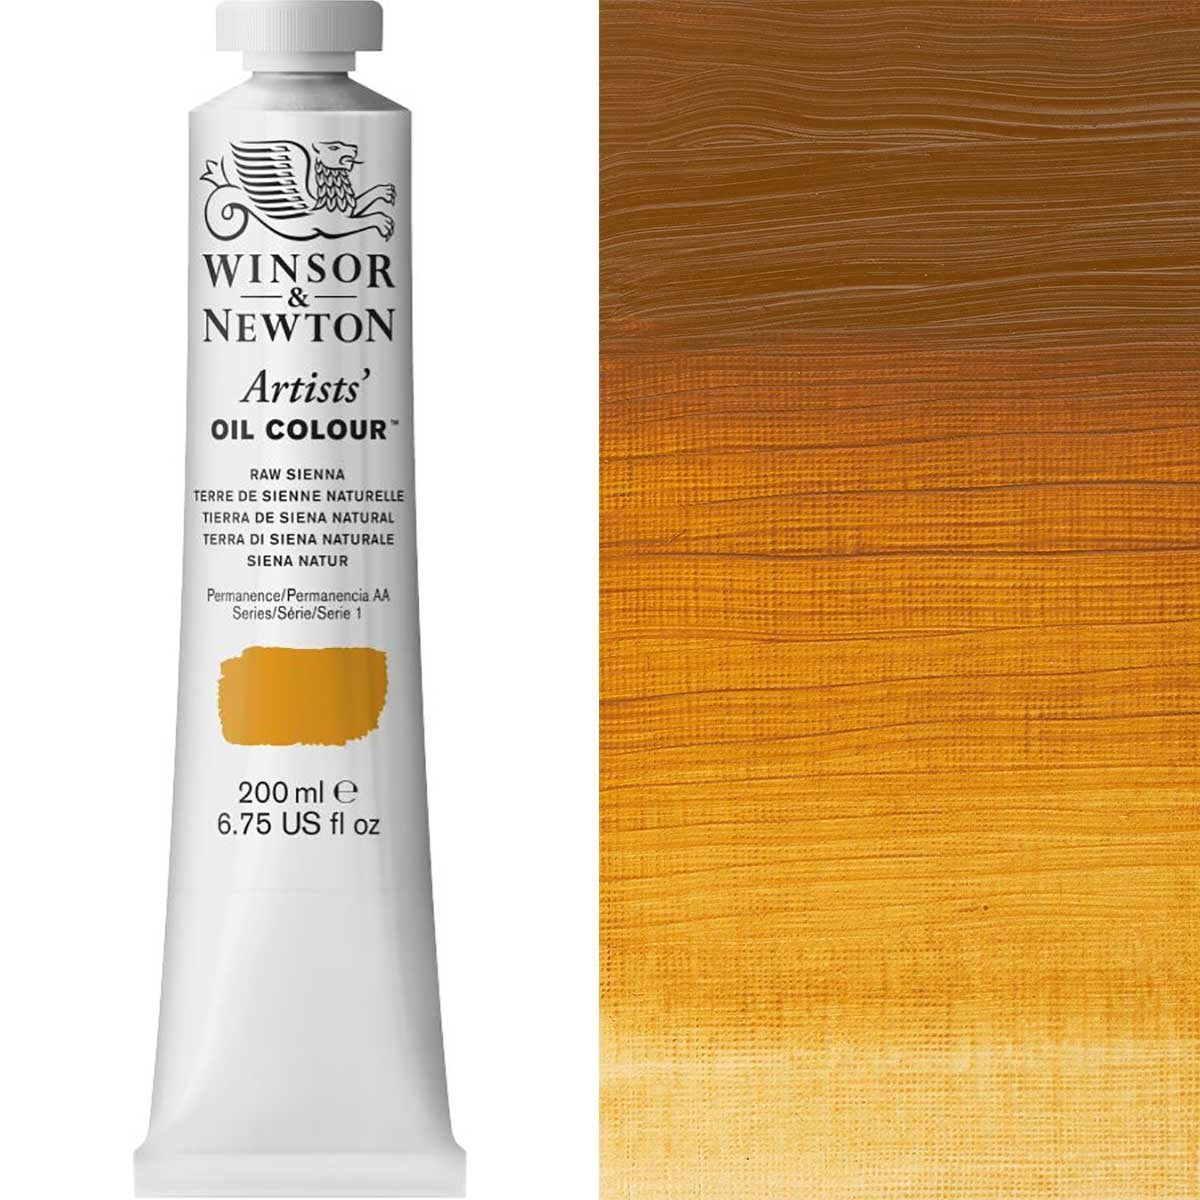 Winsor and Newton - Artists' Oil Colour - 200ml - Raw Sienna